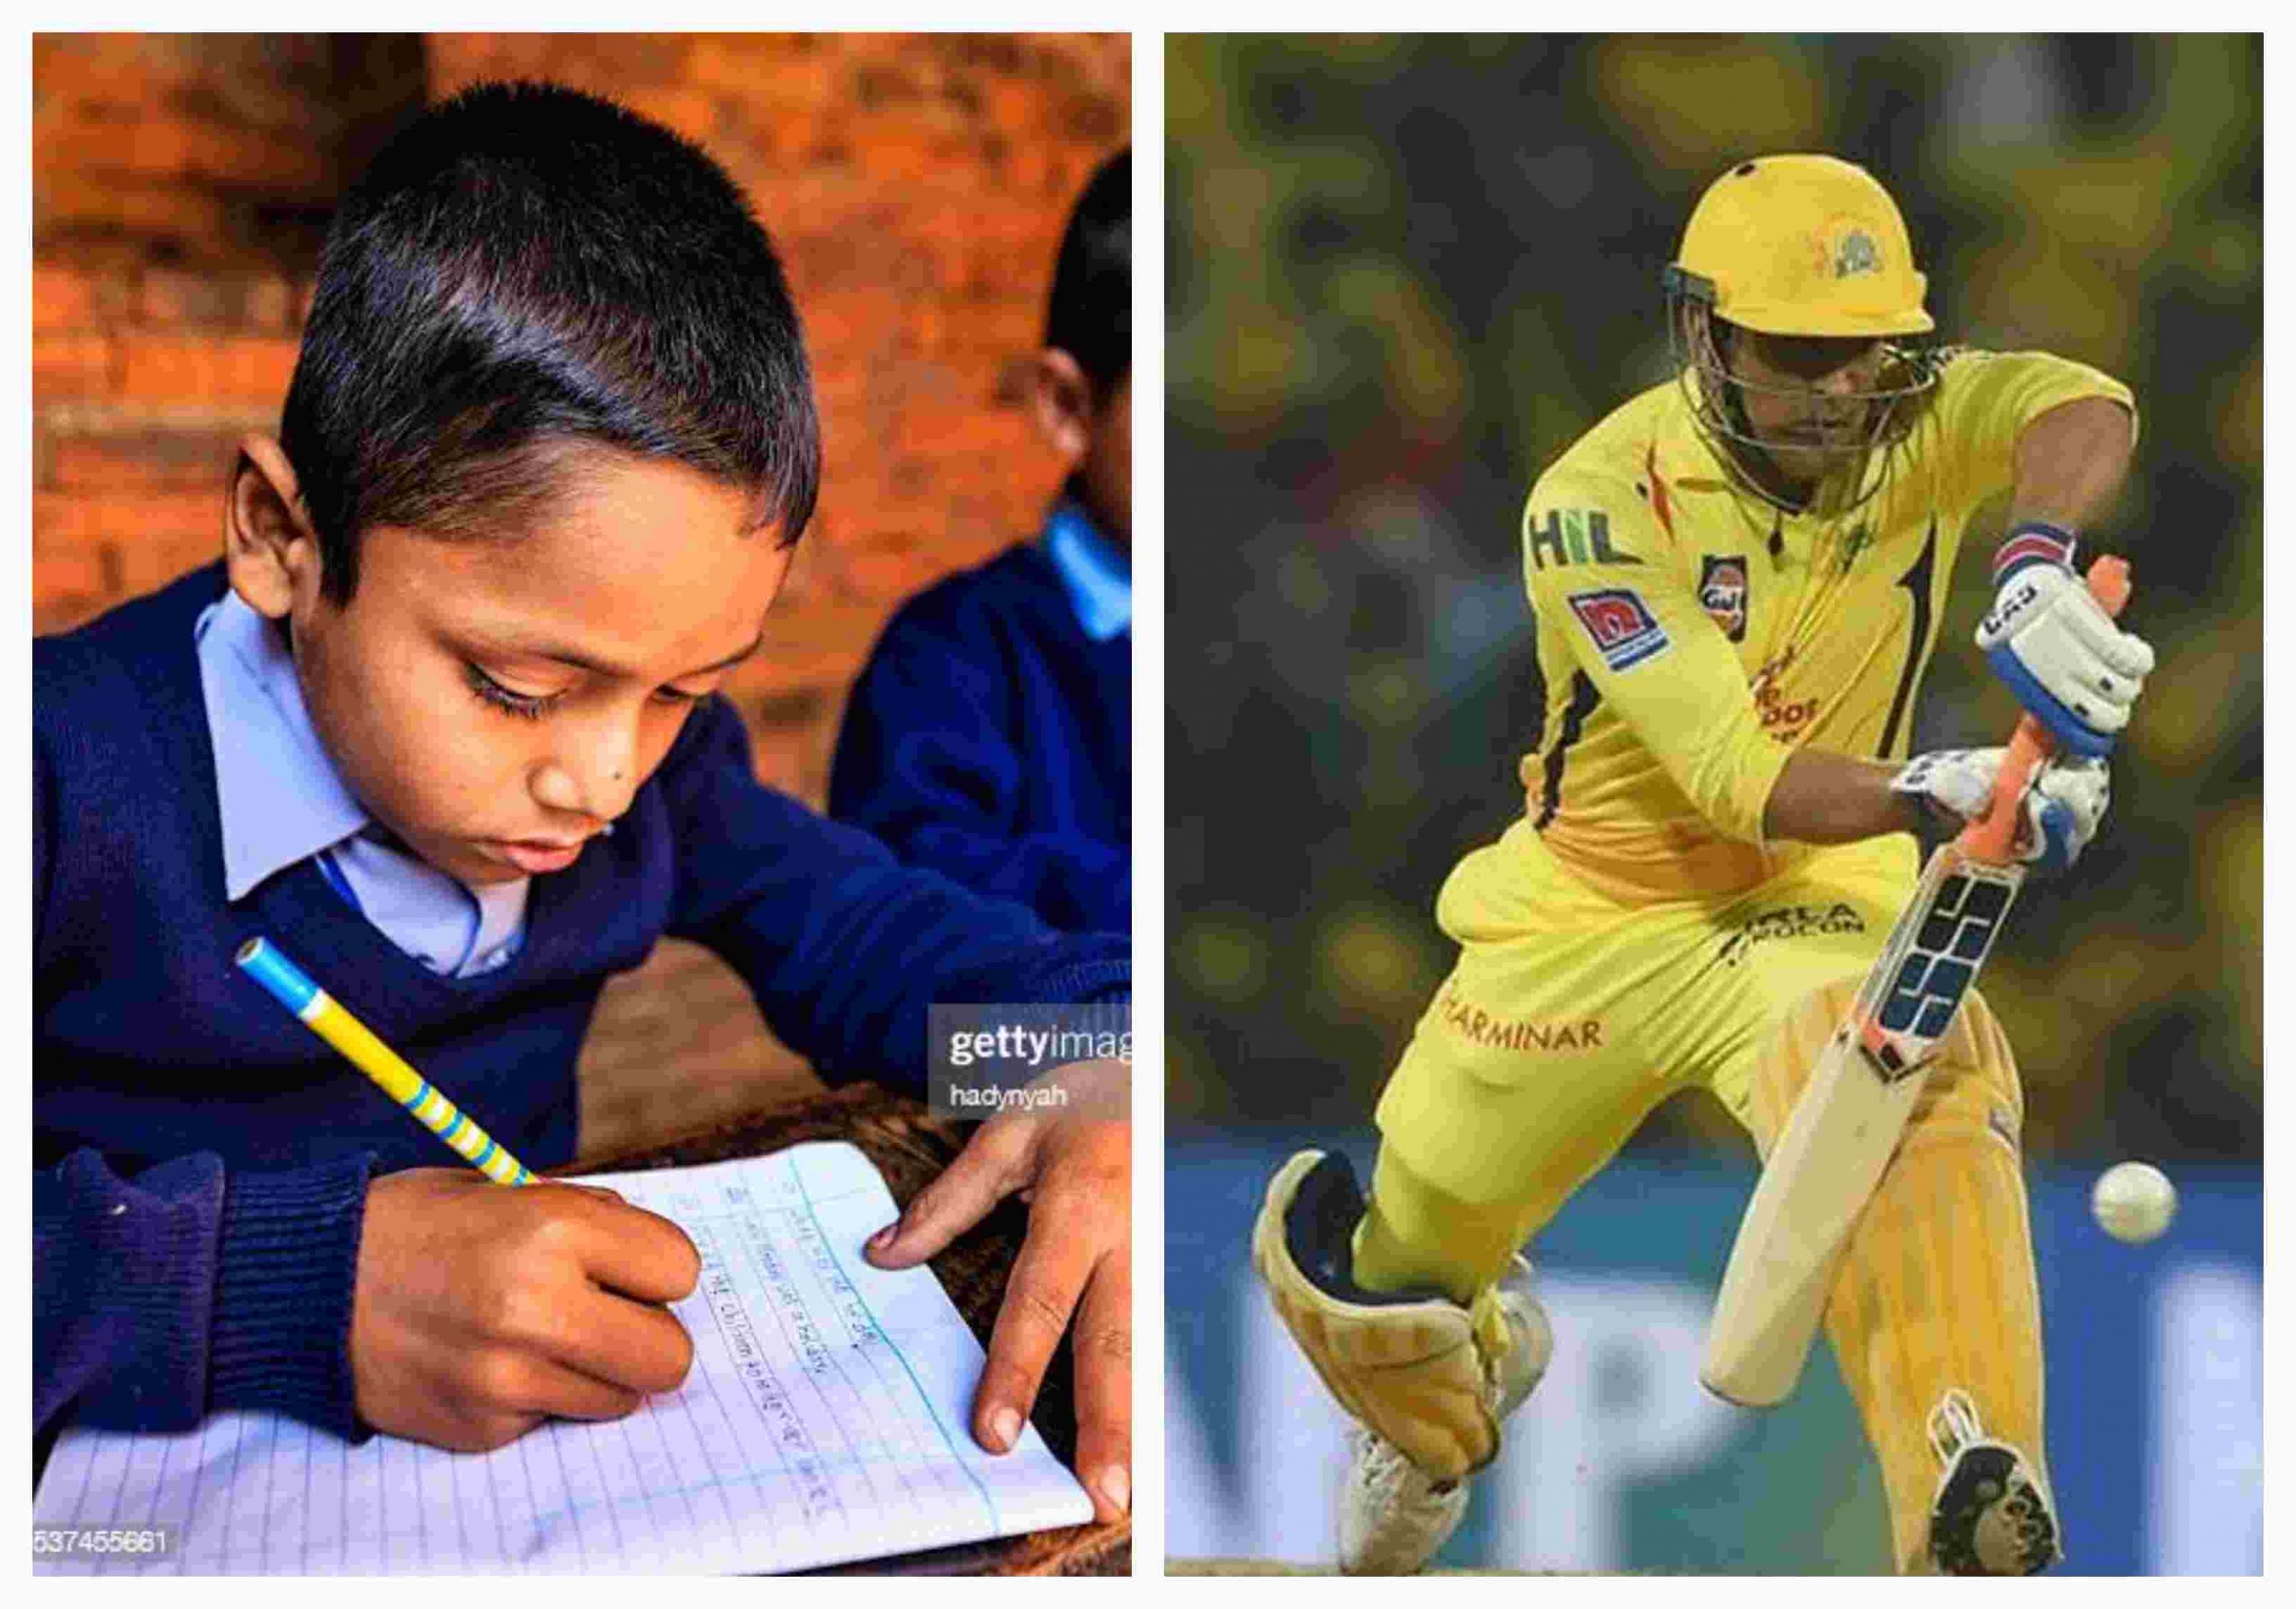 Dhoni playing for CSK